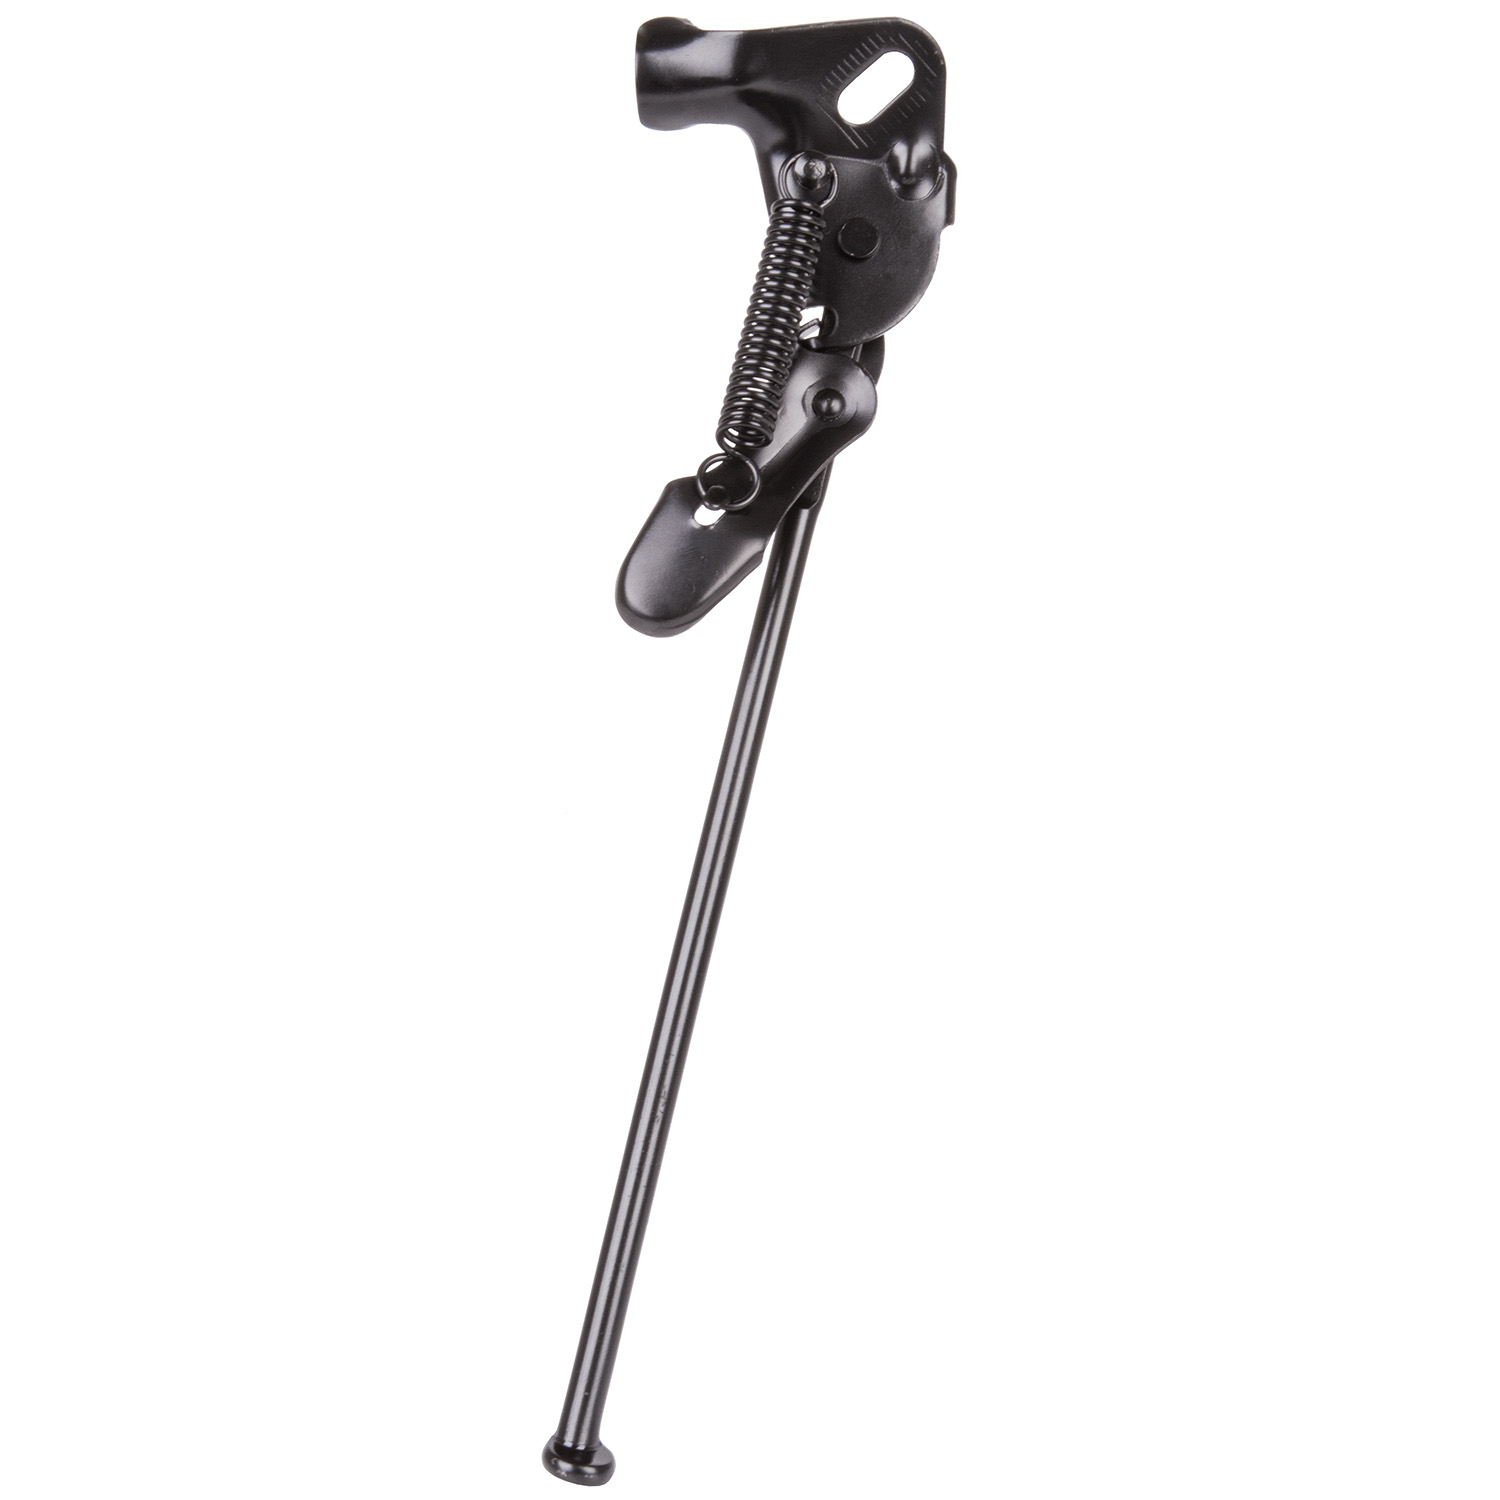 S26 bike stand – AVAILABLE IN SELECTED BIKE SHOPS